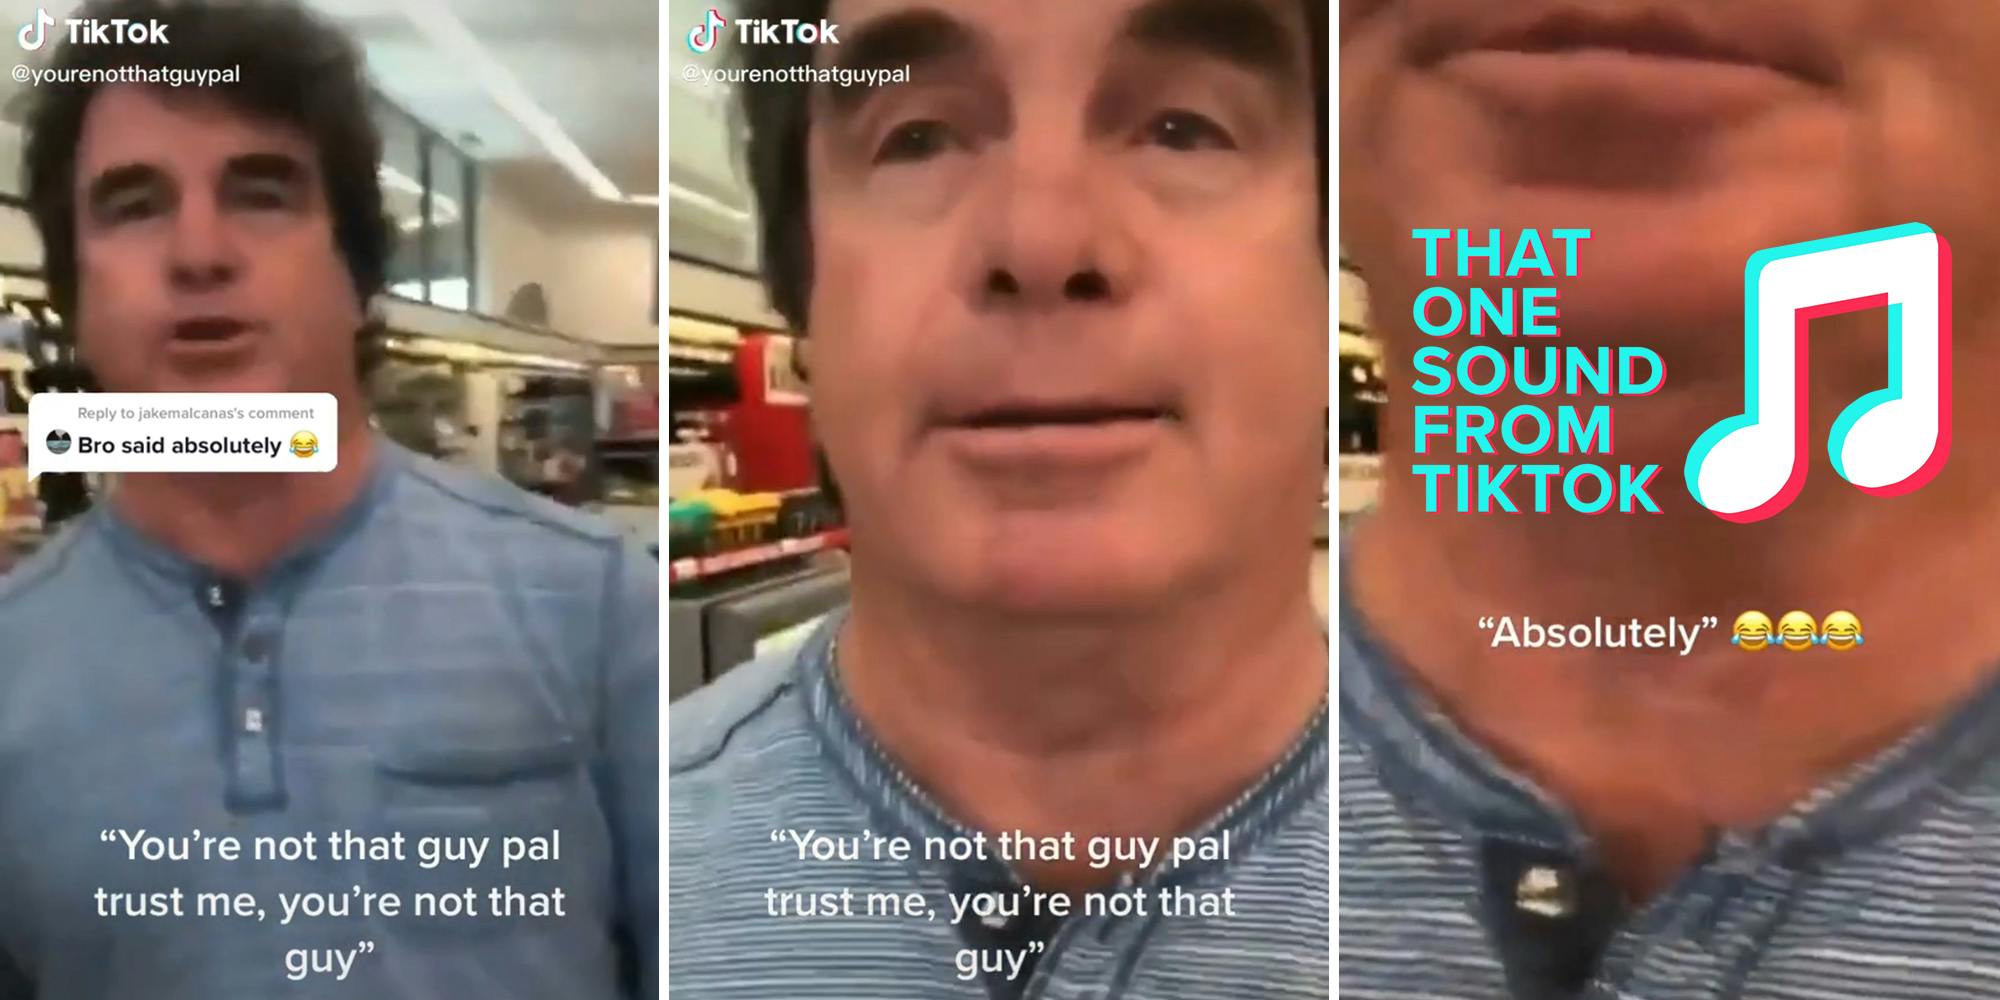 man approaching in grocery store with caption "Bro said absolutely" (l) man with "You're not that guy, pal, trust me, you're not that guy" caption (c) close up of man's mouth and neck with caption "Absolutely" and "That one sound from tiktok" logo